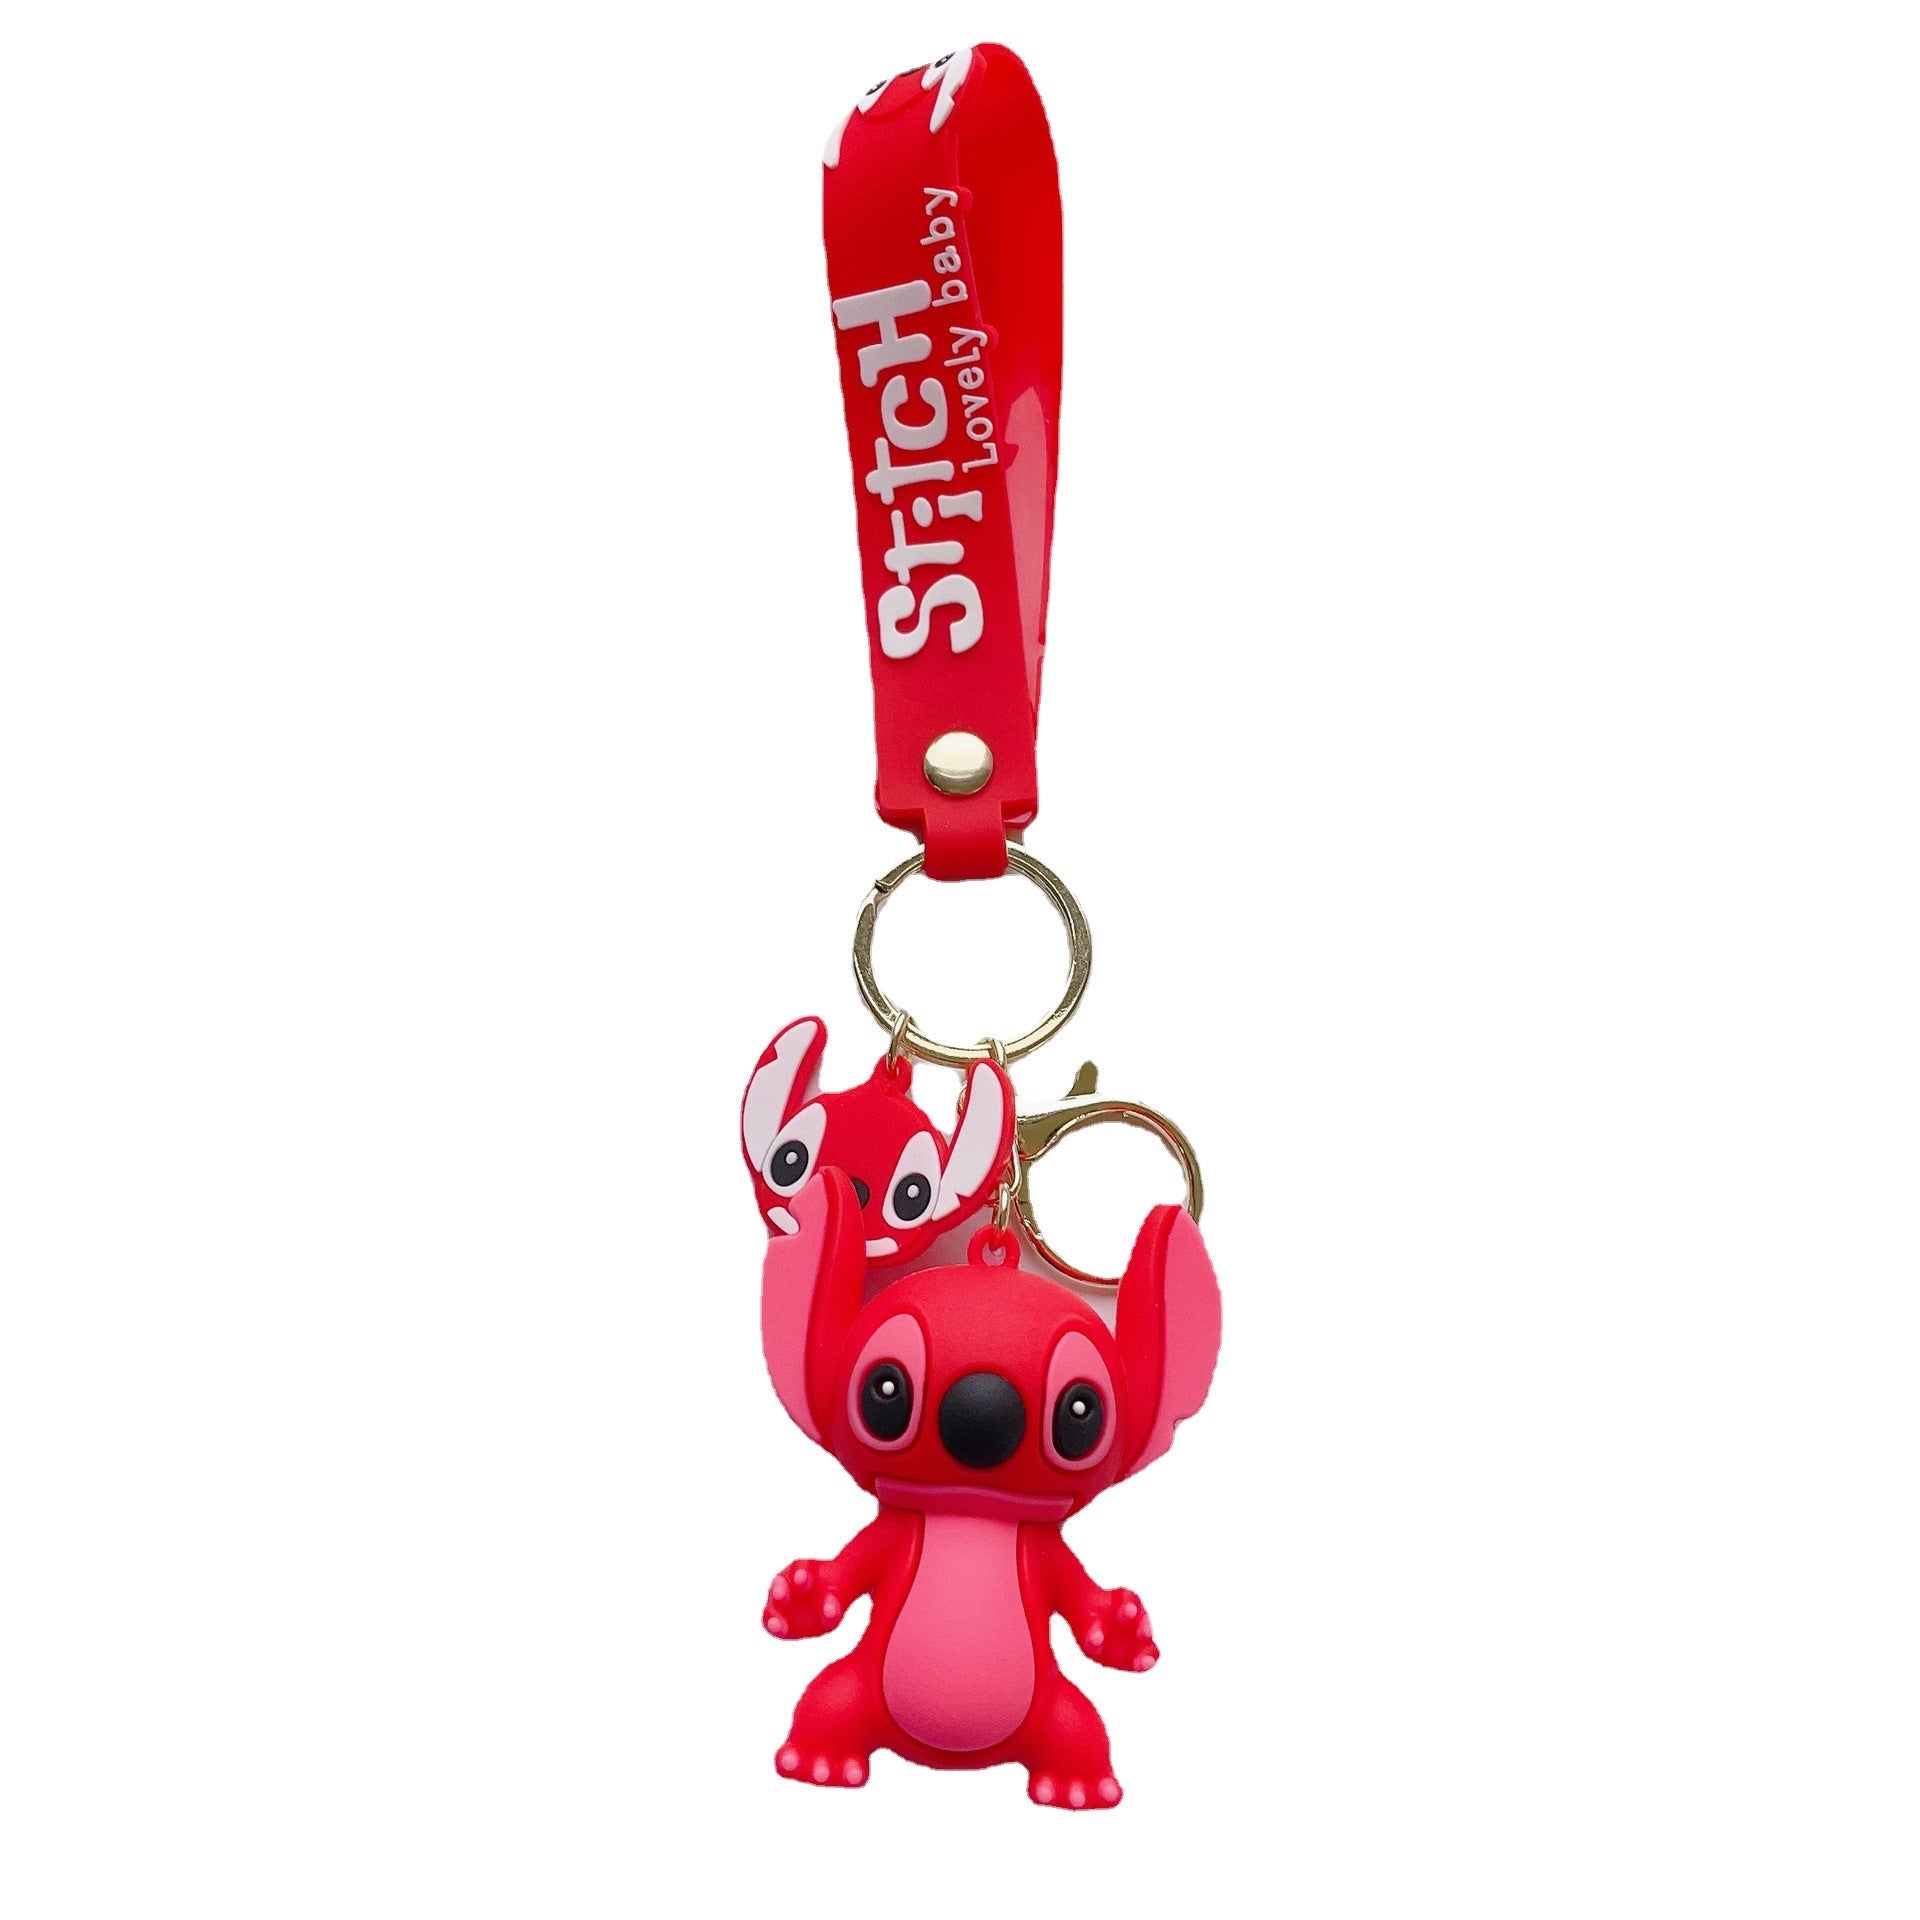 OLM Lilo & Stitch Action Figure Keychain - OLMCOL A